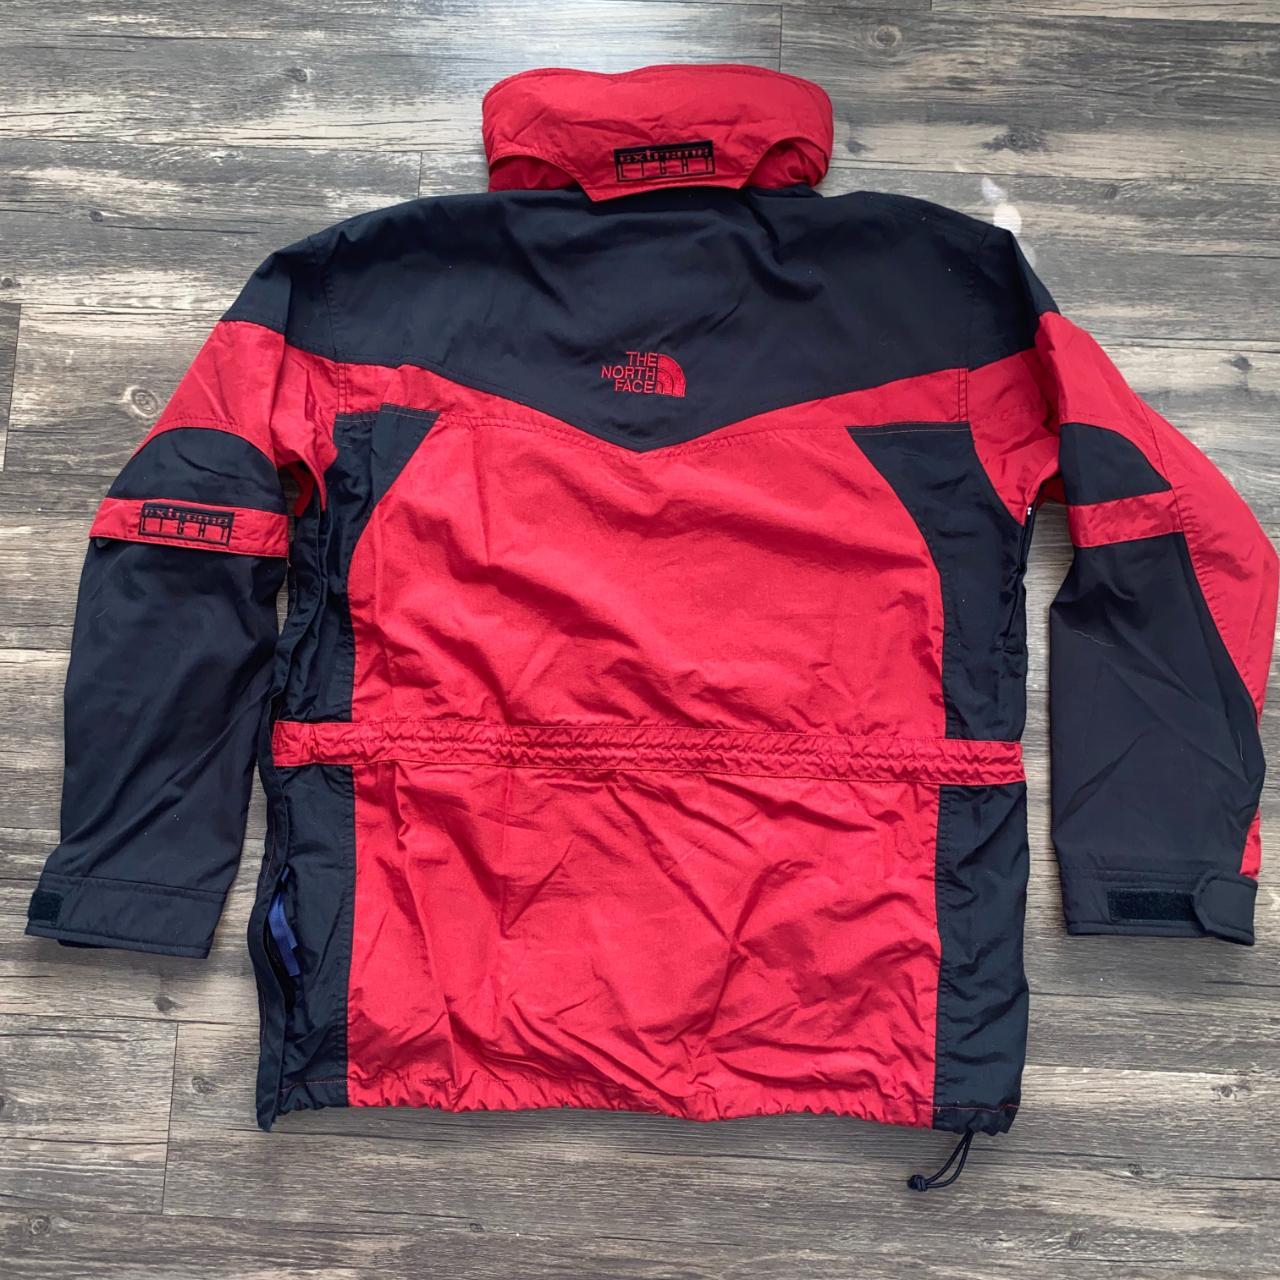 The North Face Men's Black and Red Jacket | Depop